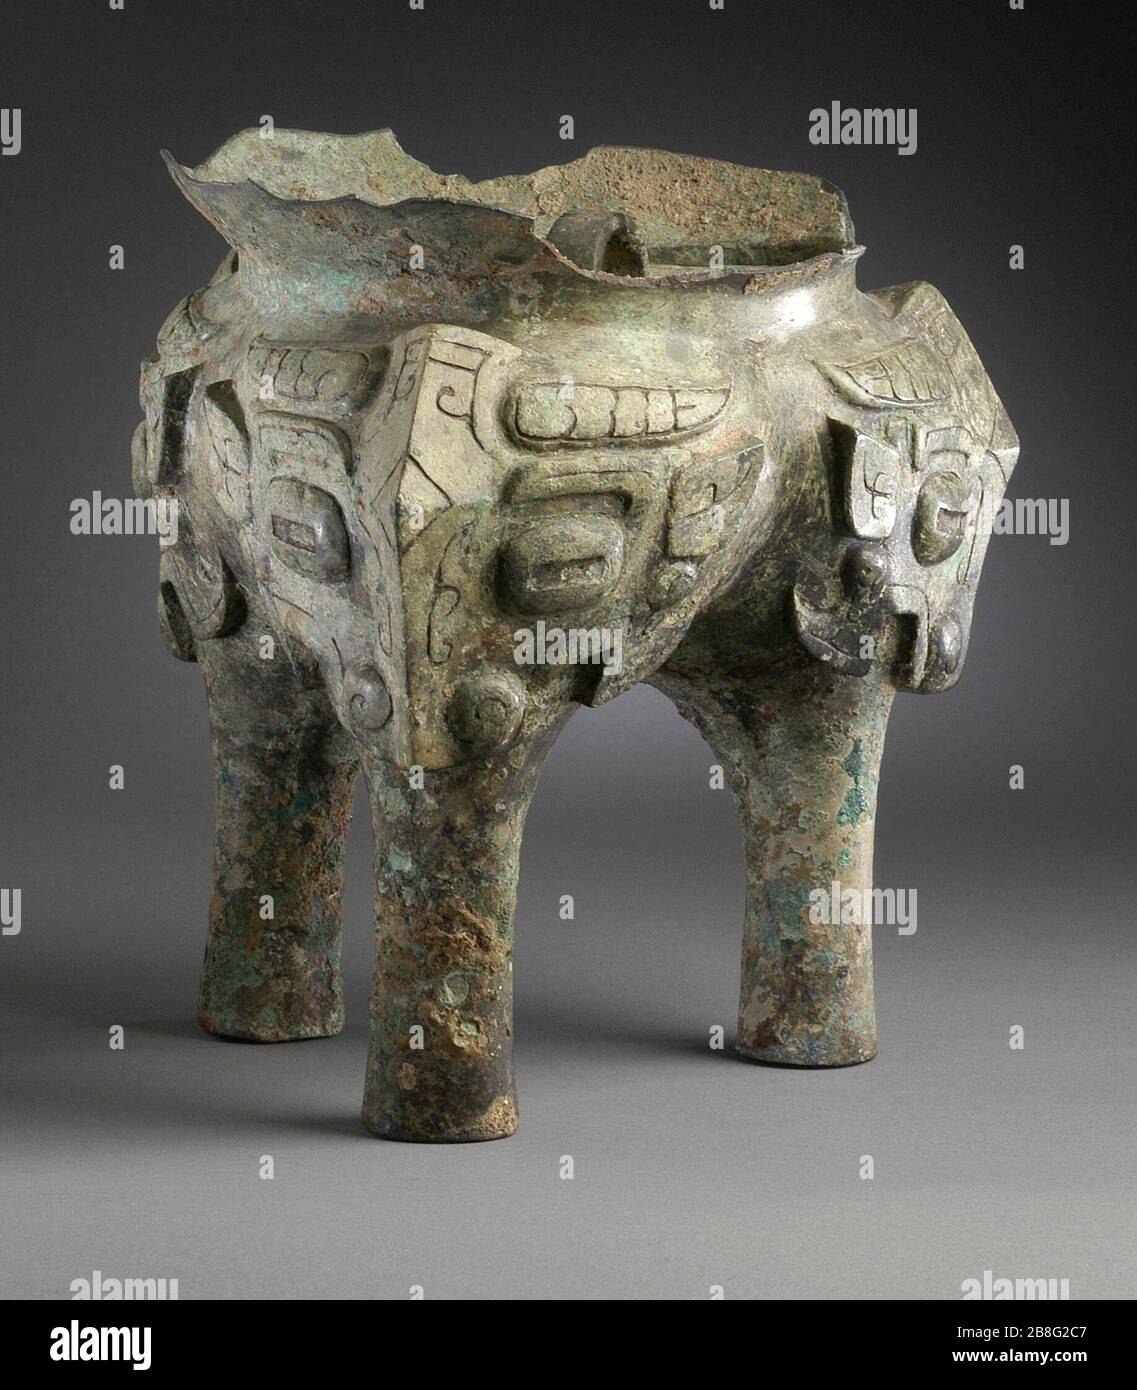 'Fragment of a Ritual Grain Steamer (Yan) with Masks; China, Late Shang dynasty, late Anyang phase, or early Western Zhou dynasty, about 1100-950 B.C.  Jewelry and Adornments; masks Cast bronze 8 1/8 x 7 1/4 in. (20.64 x 18.42 cm) Gift of Mr. and Mrs. Eric Lidow (AC1998.251.40) Chinese Art; between circa 1100 and circa 950 B.C.; ' Stock Photo